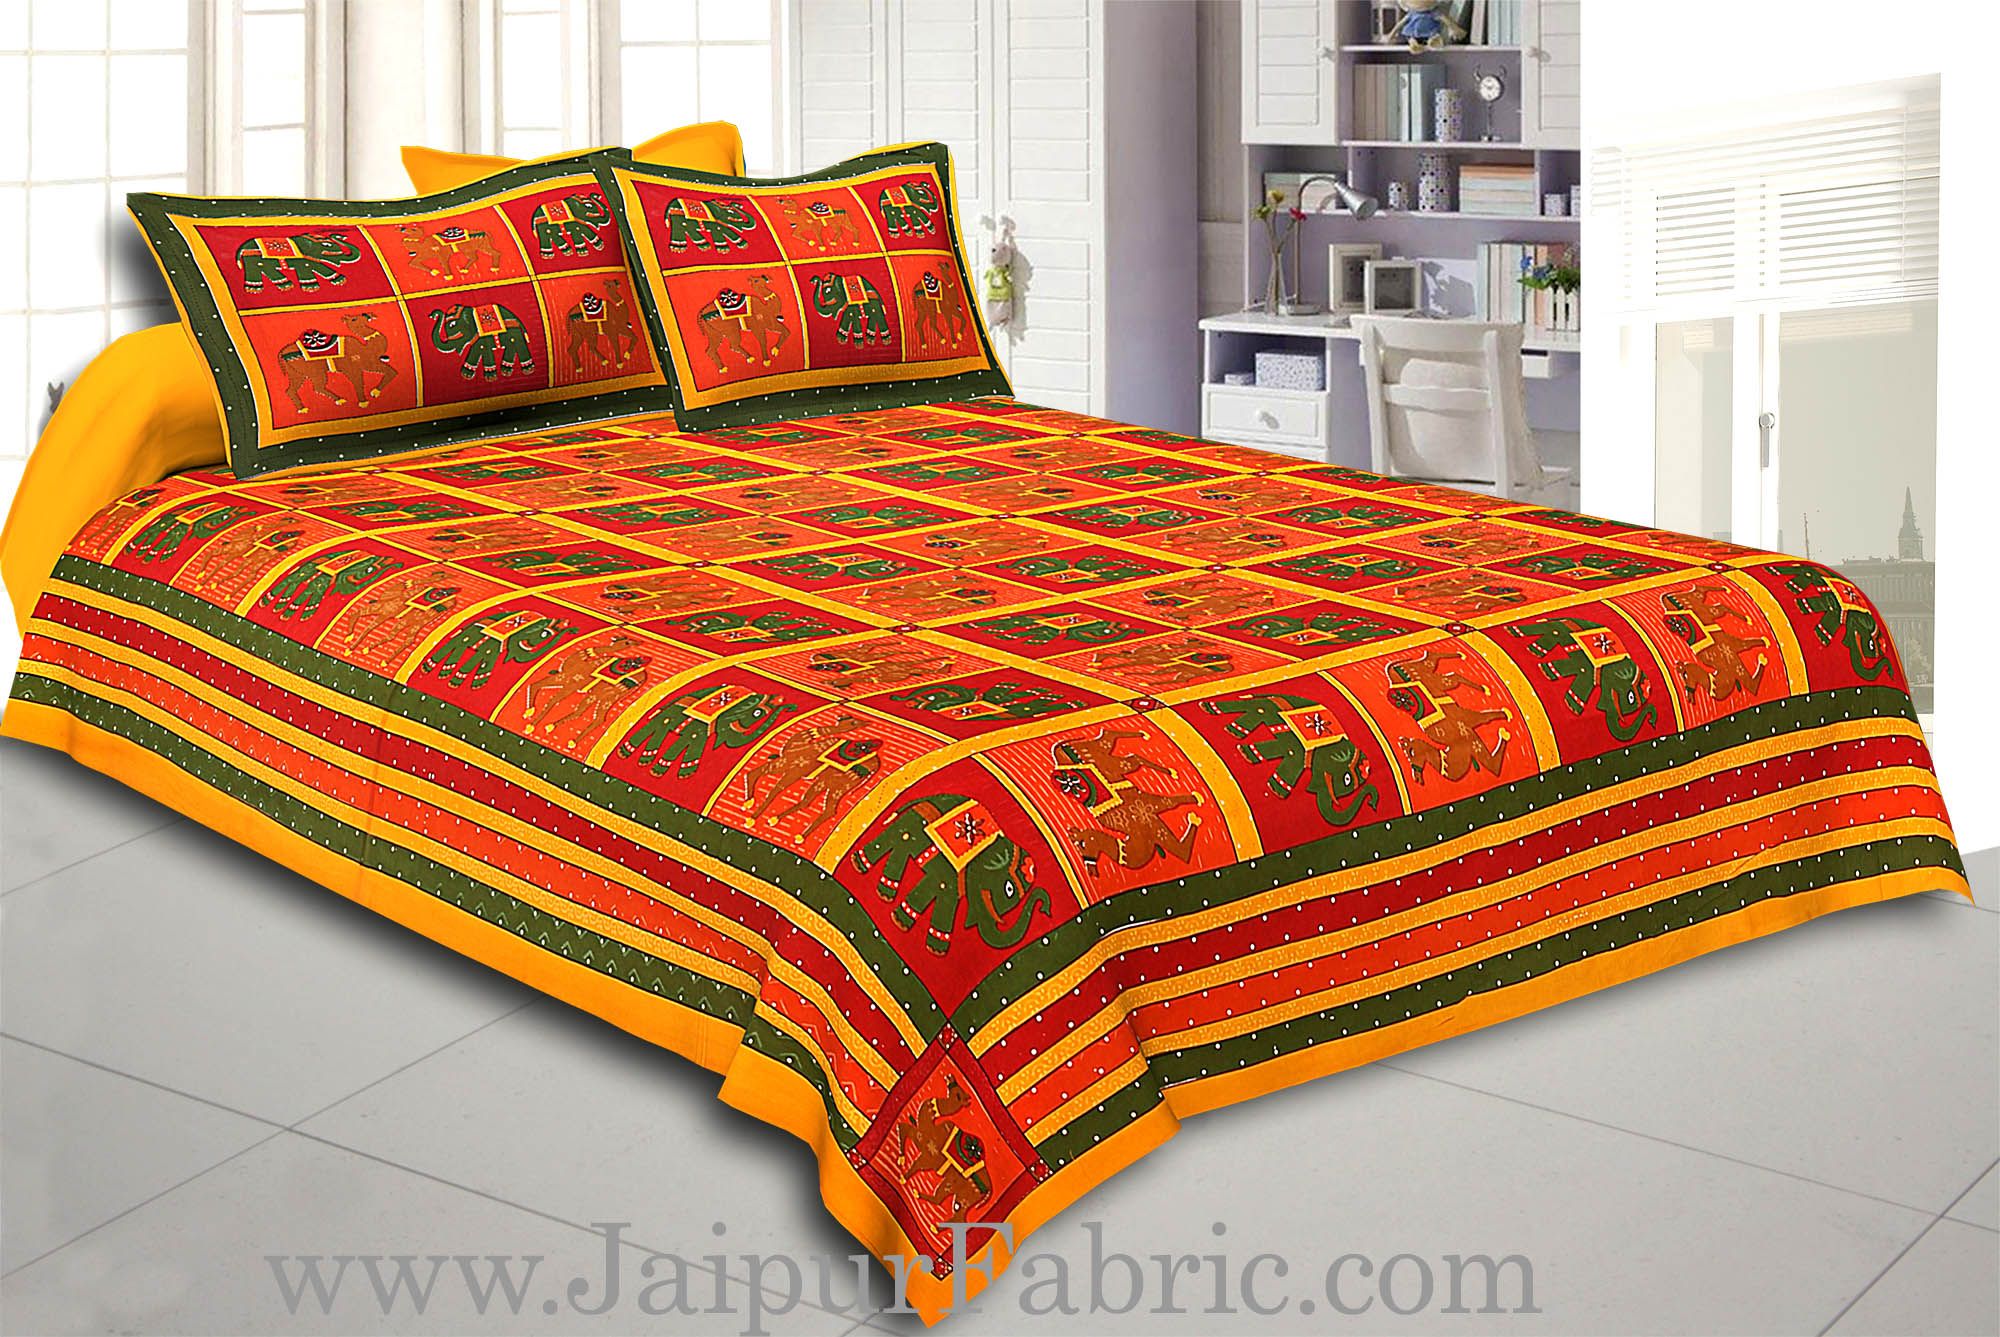 Yellow  Lining And Dotted Border Camel And Elephant Print In Sqare Pattern Cotton Double Bed Sheet